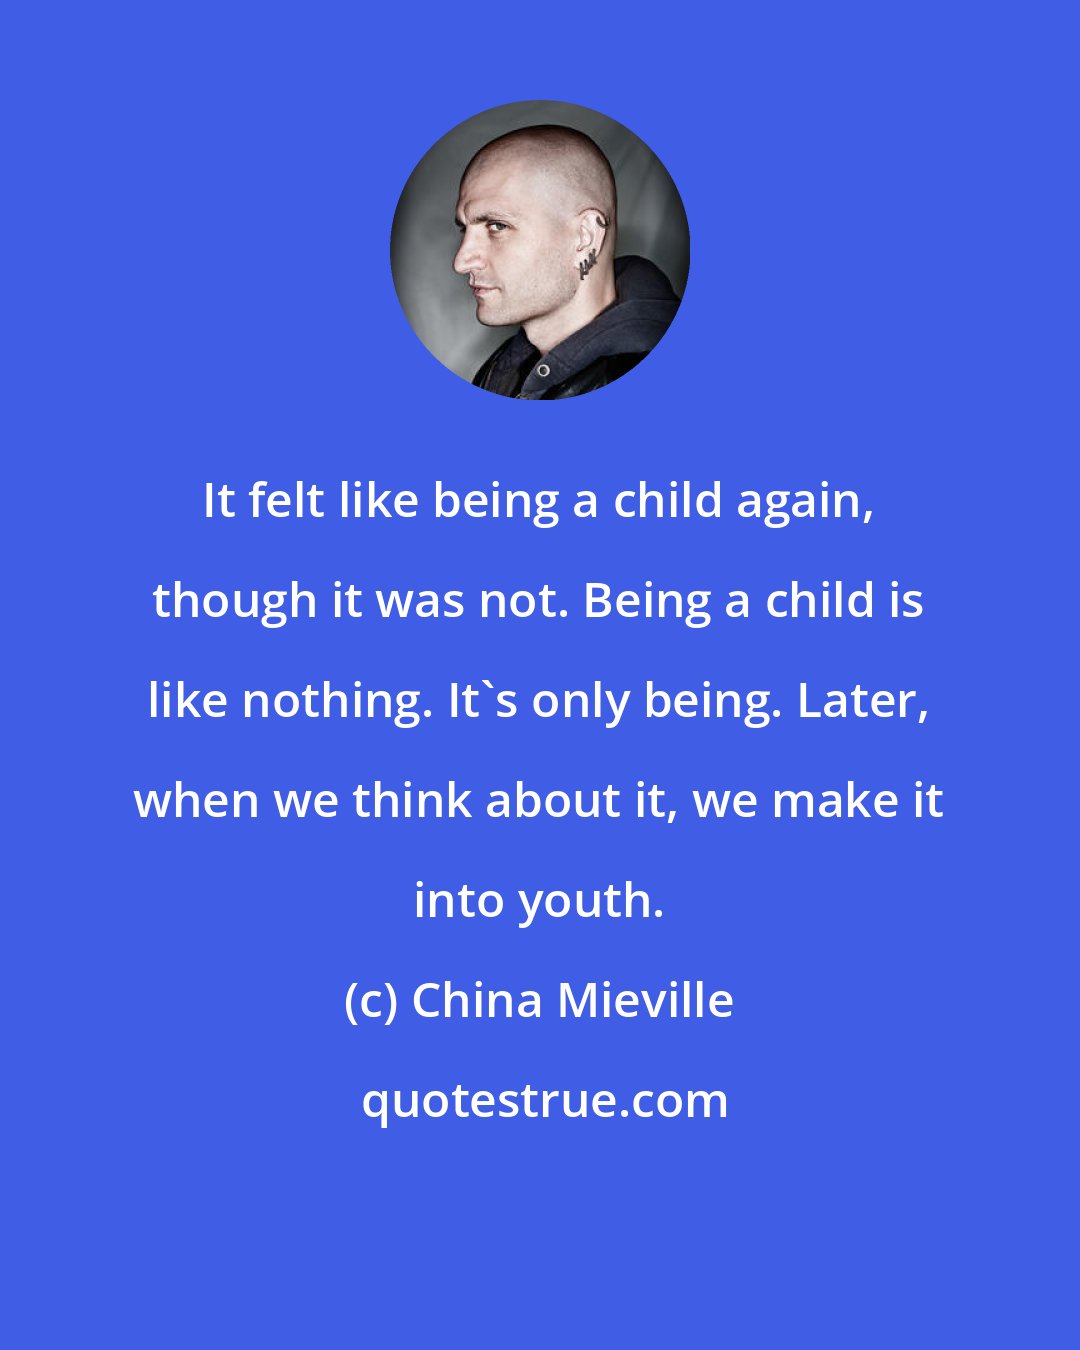 China Mieville: It felt like being a child again, though it was not. Being a child is like nothing. It's only being. Later, when we think about it, we make it into youth.